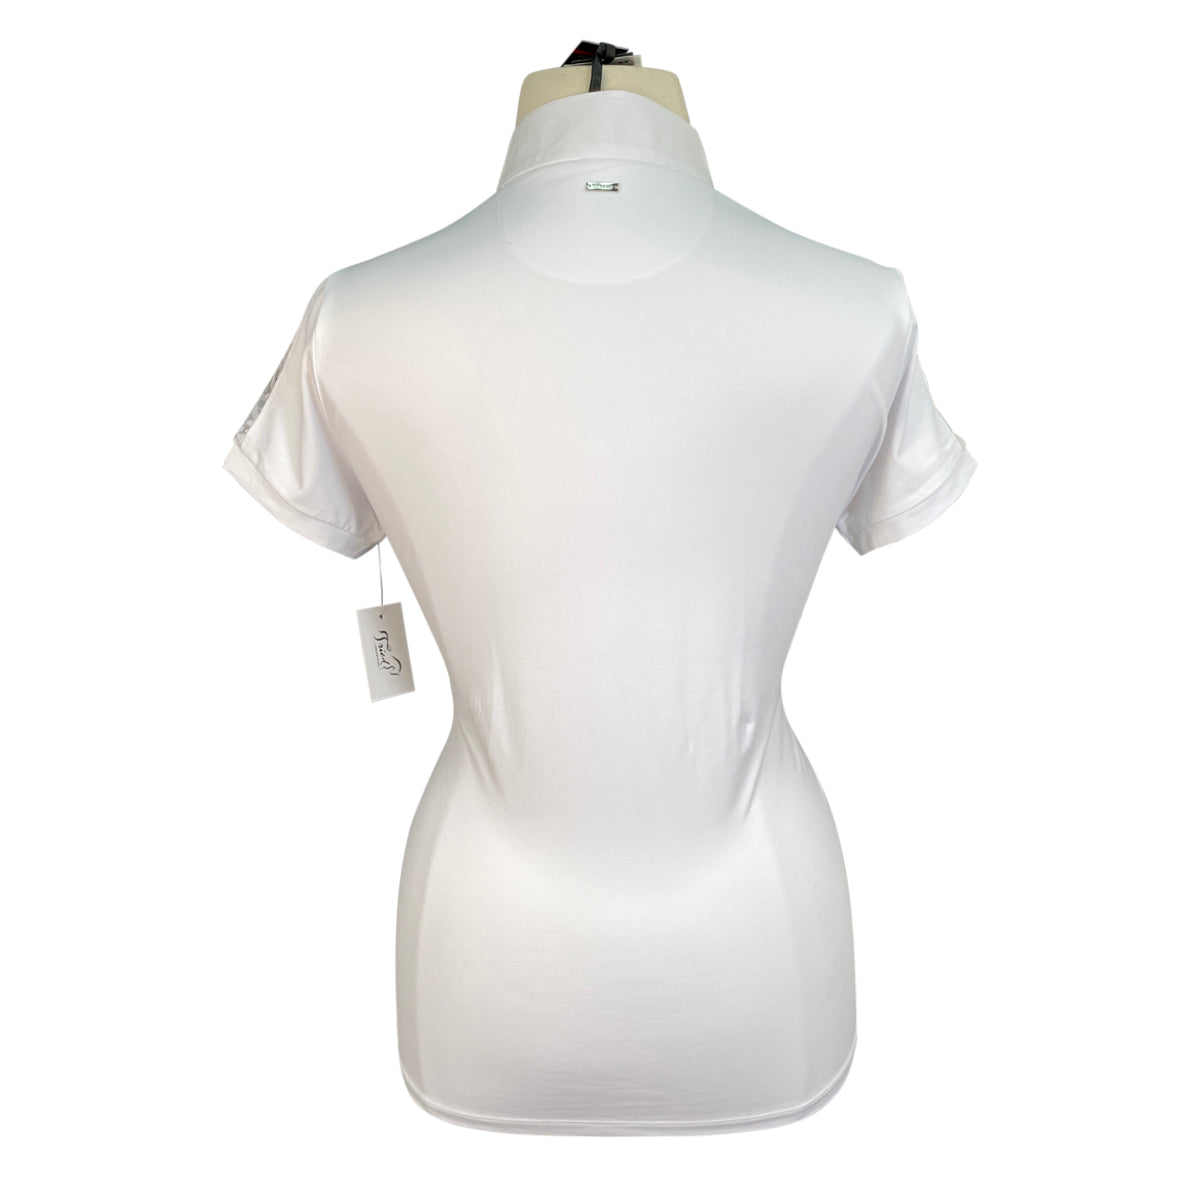 Pikeur &#39;Melenie&#39; Competition Shirt in White - Women&#39;s GE 46 (US XL)